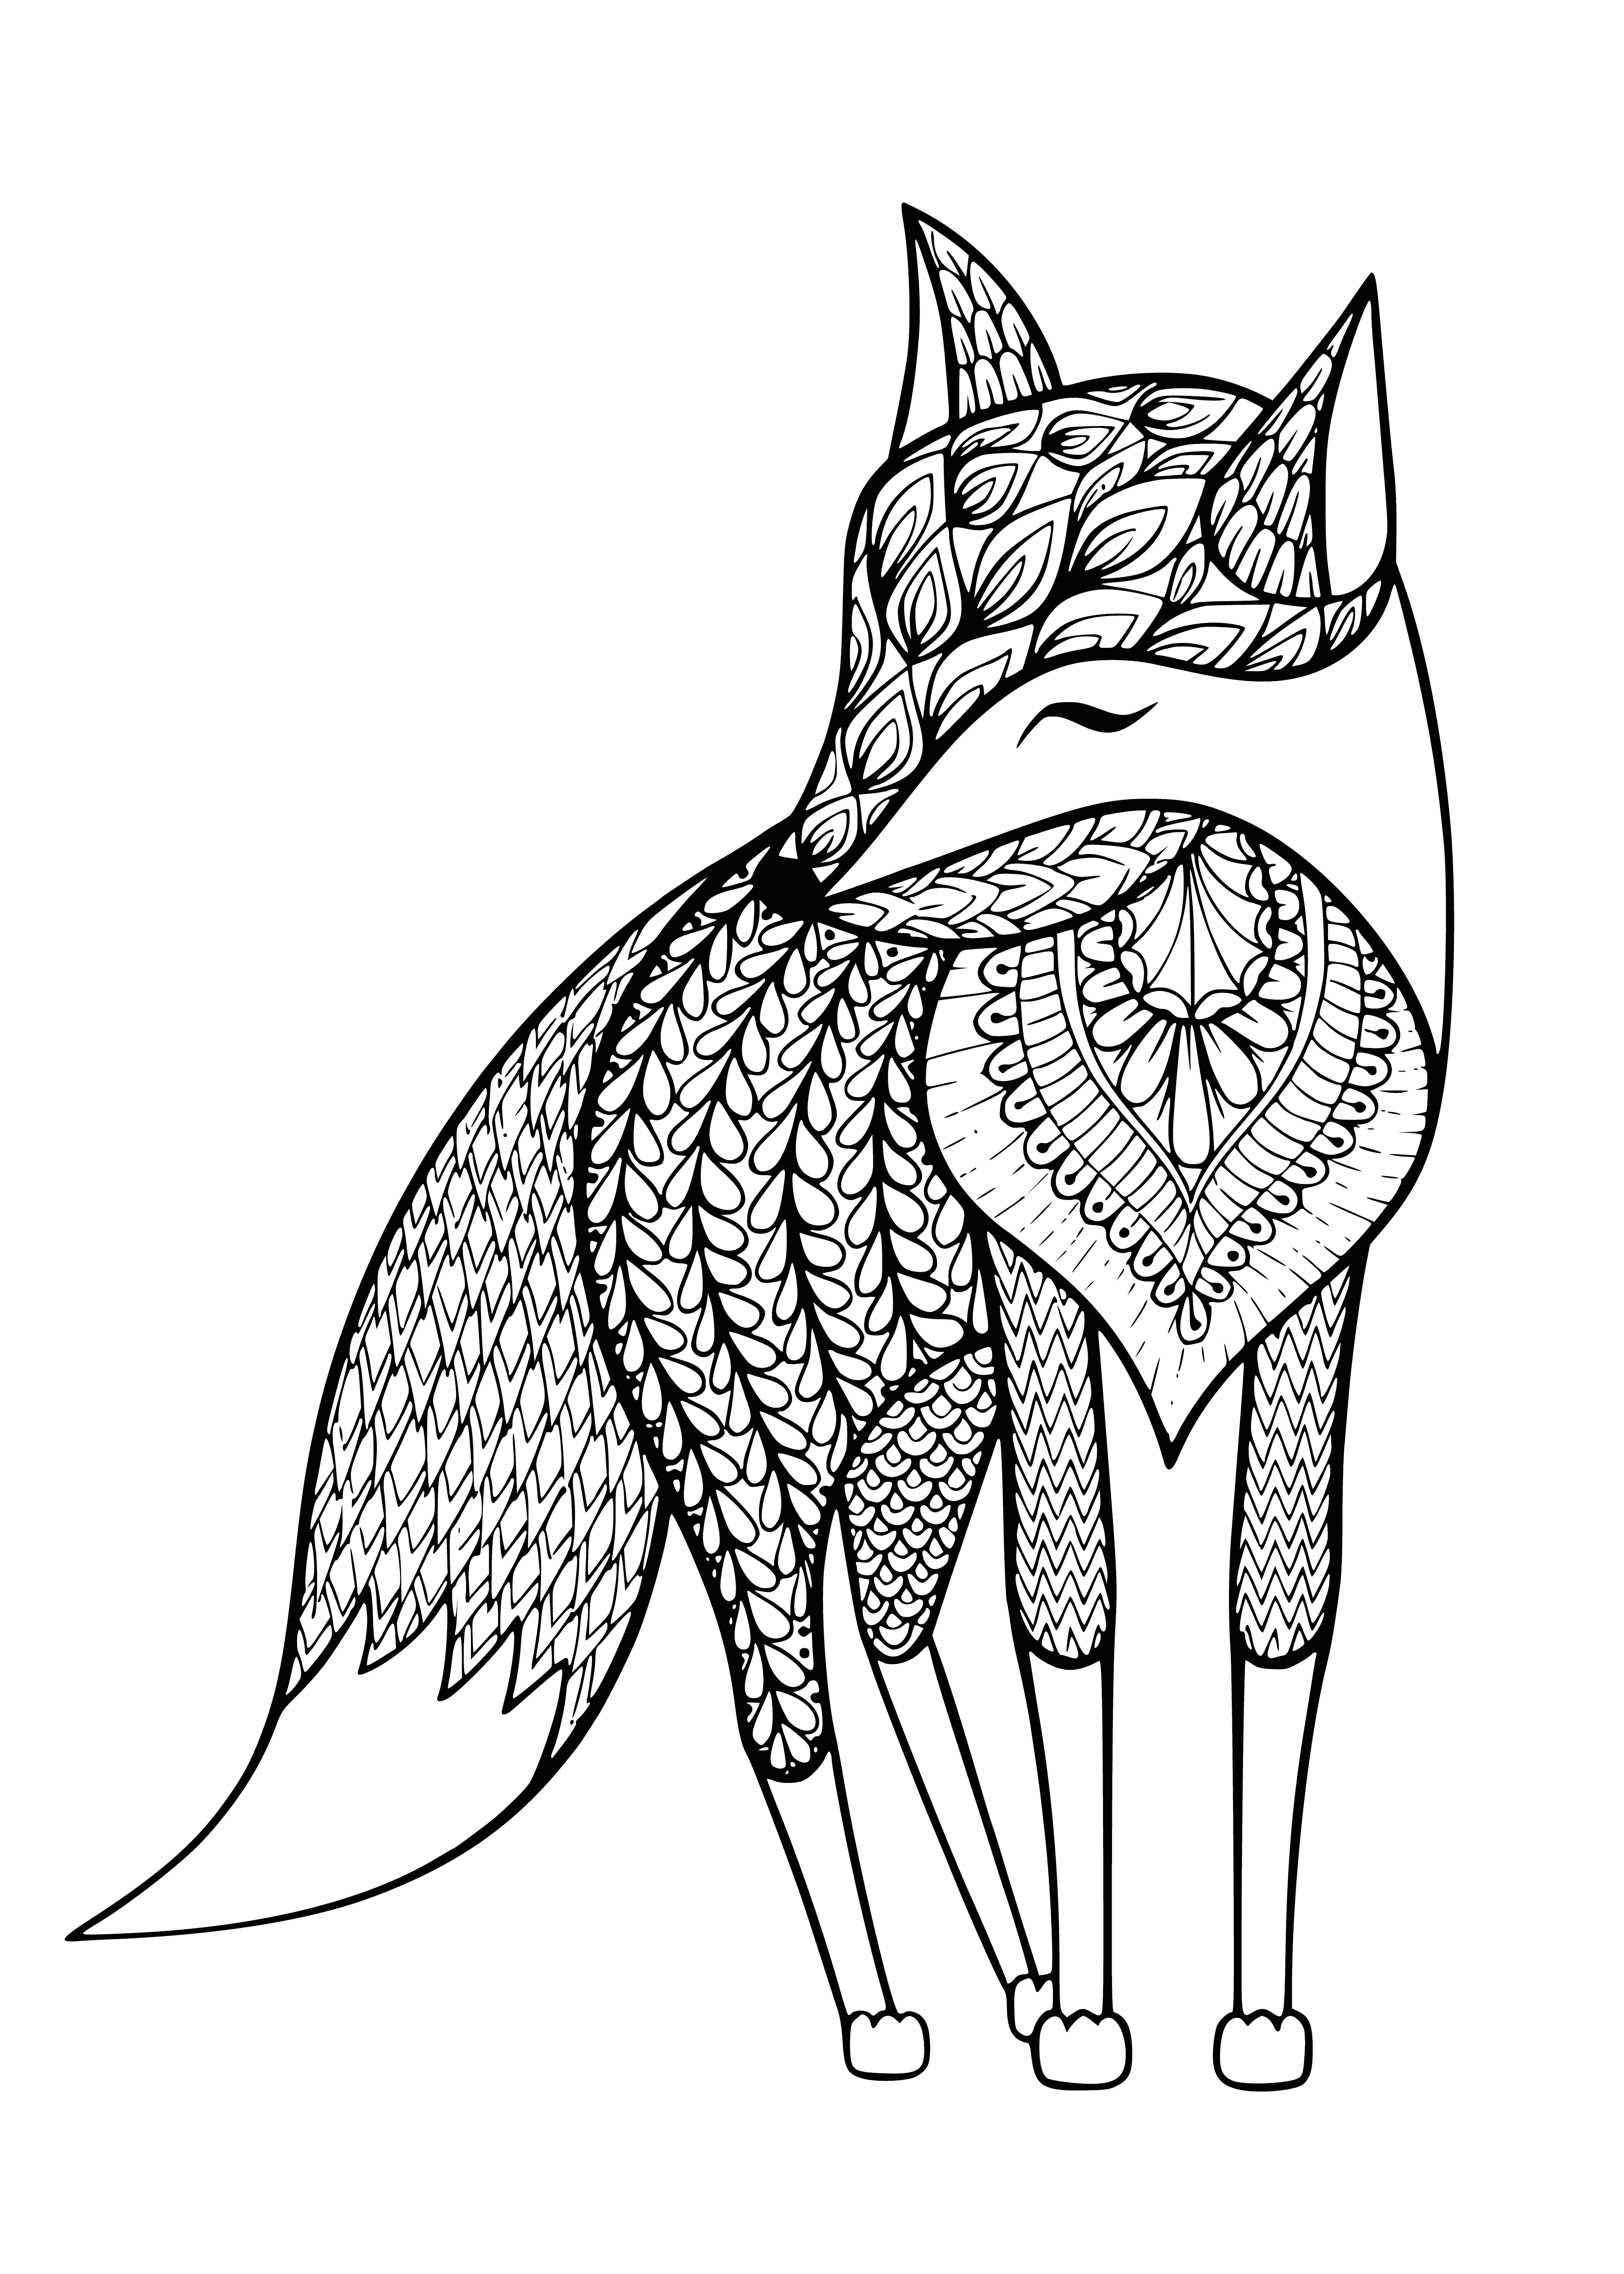 coloring page: Two foxes stand, looking at one another - orange and white with bushy tails and pointy ears.